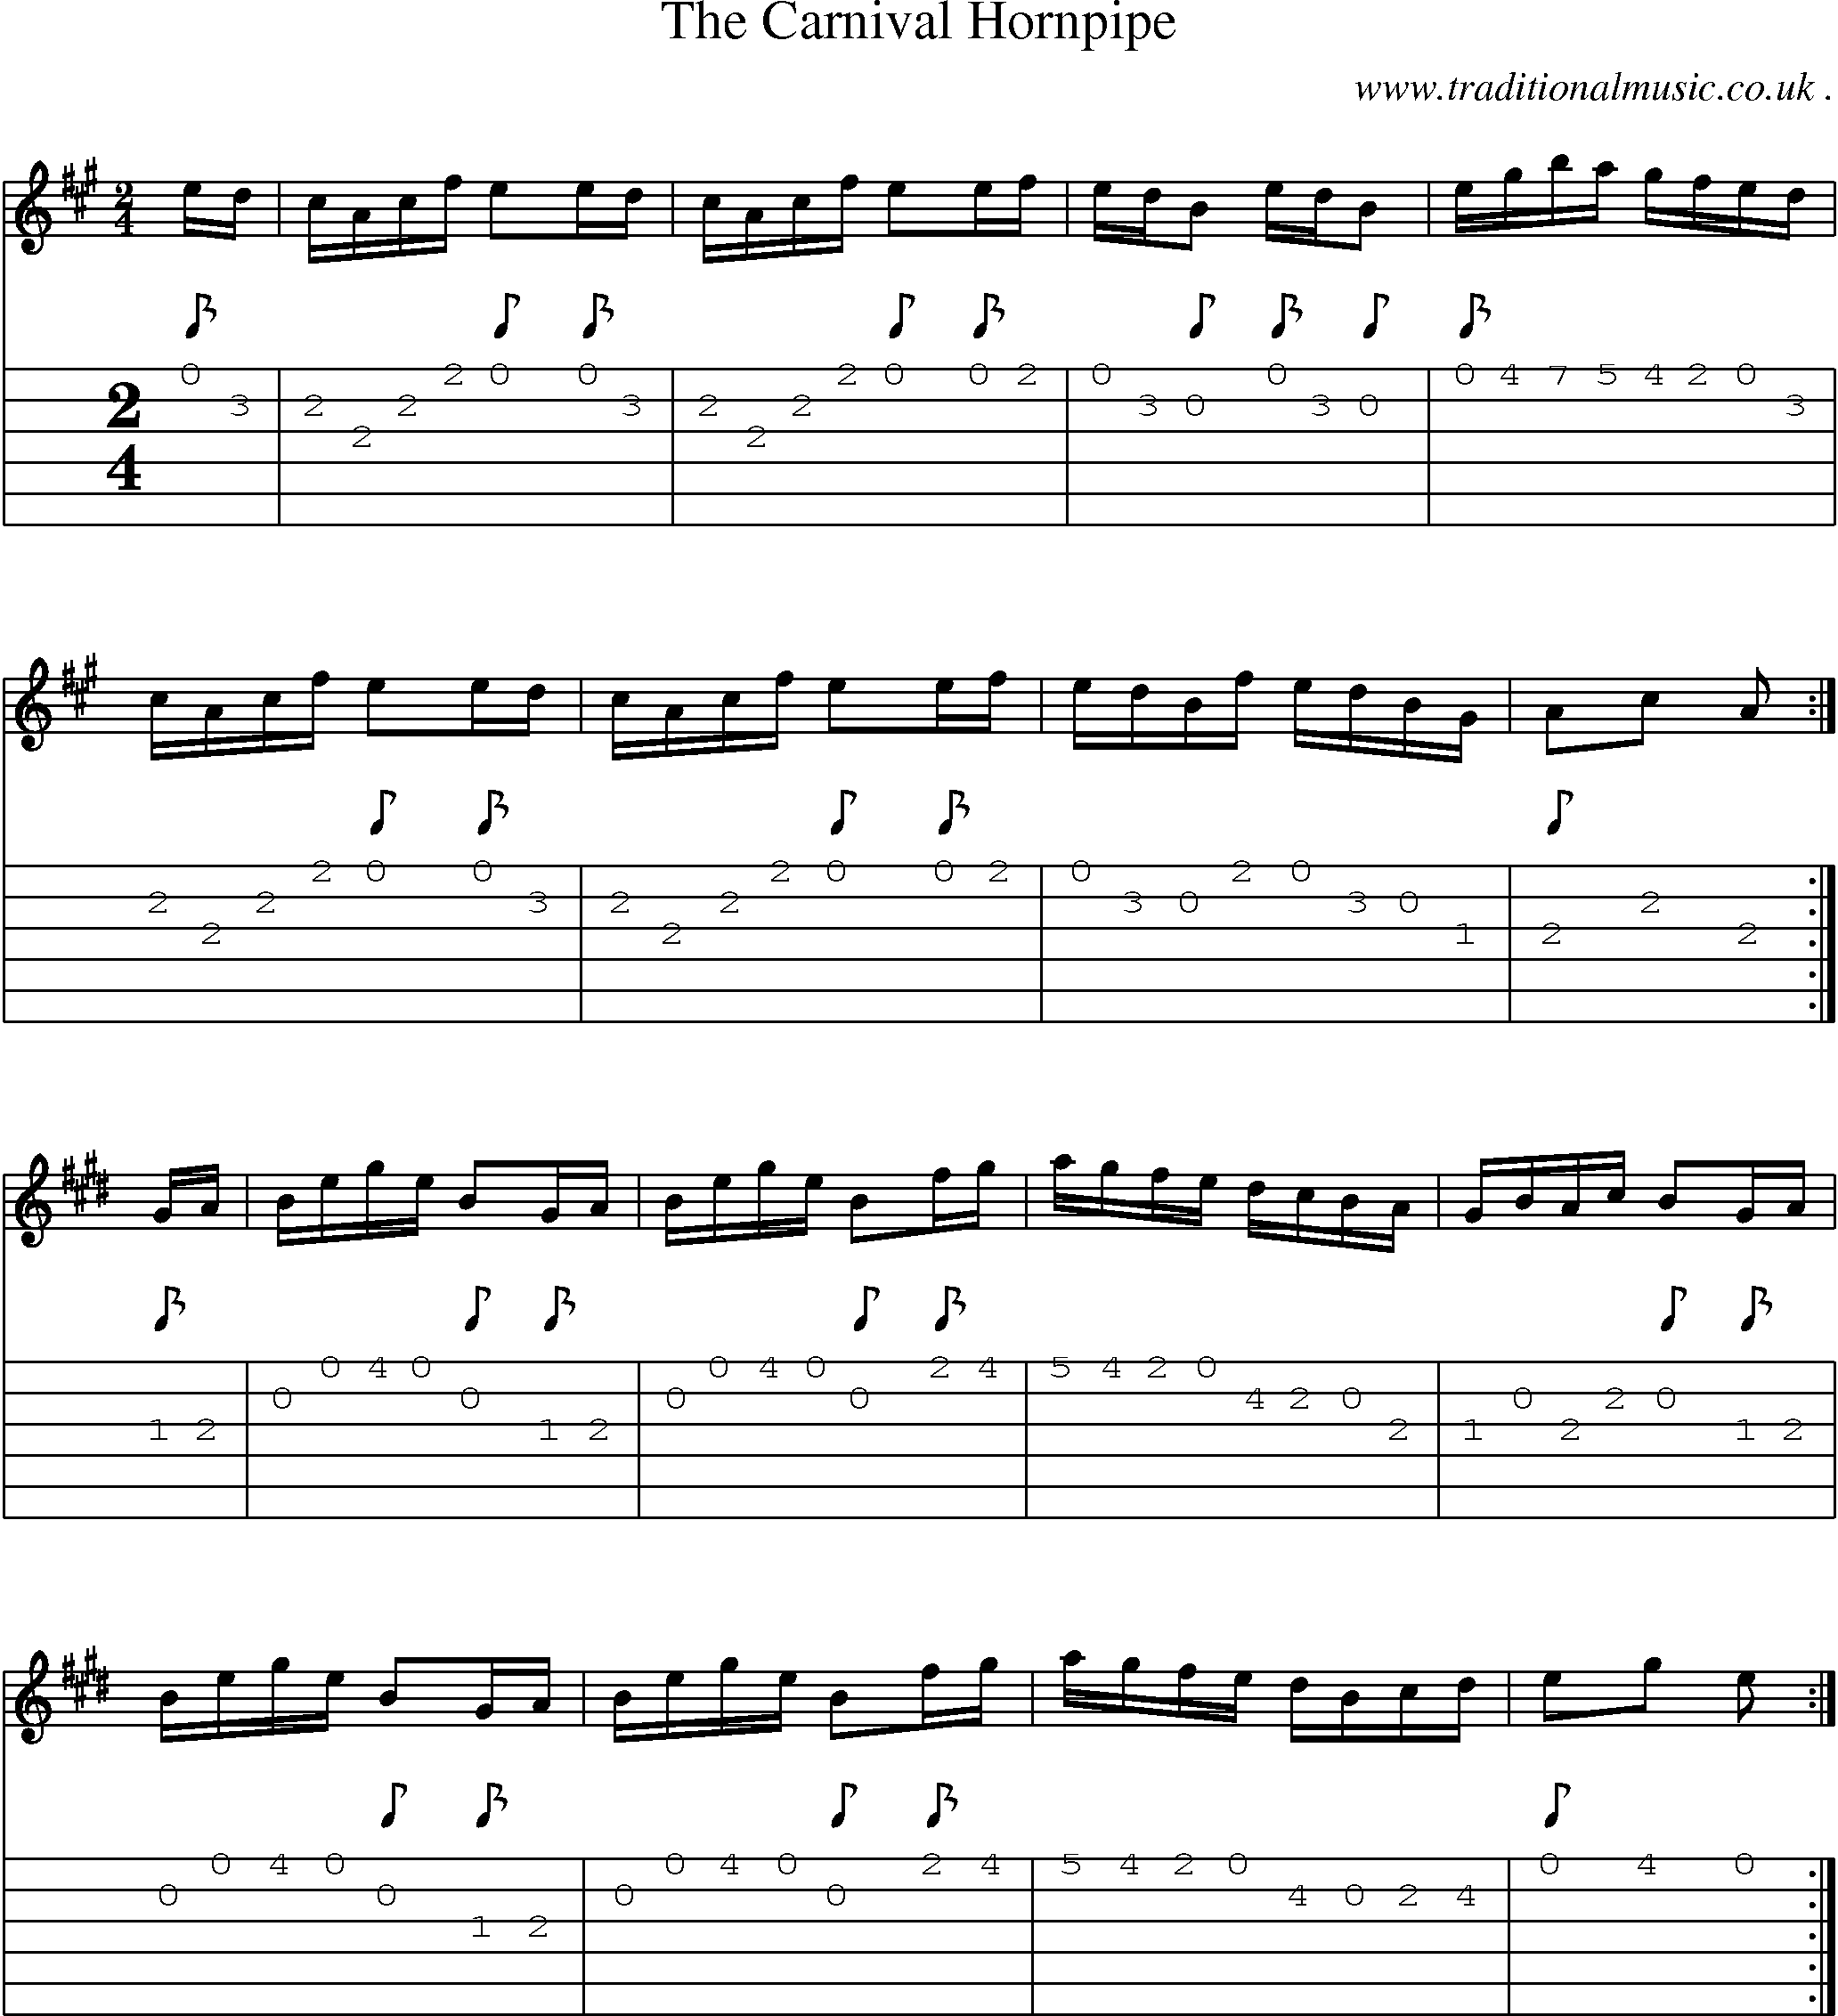 Sheet-Music and Guitar Tabs for The Carnival Hornpipe